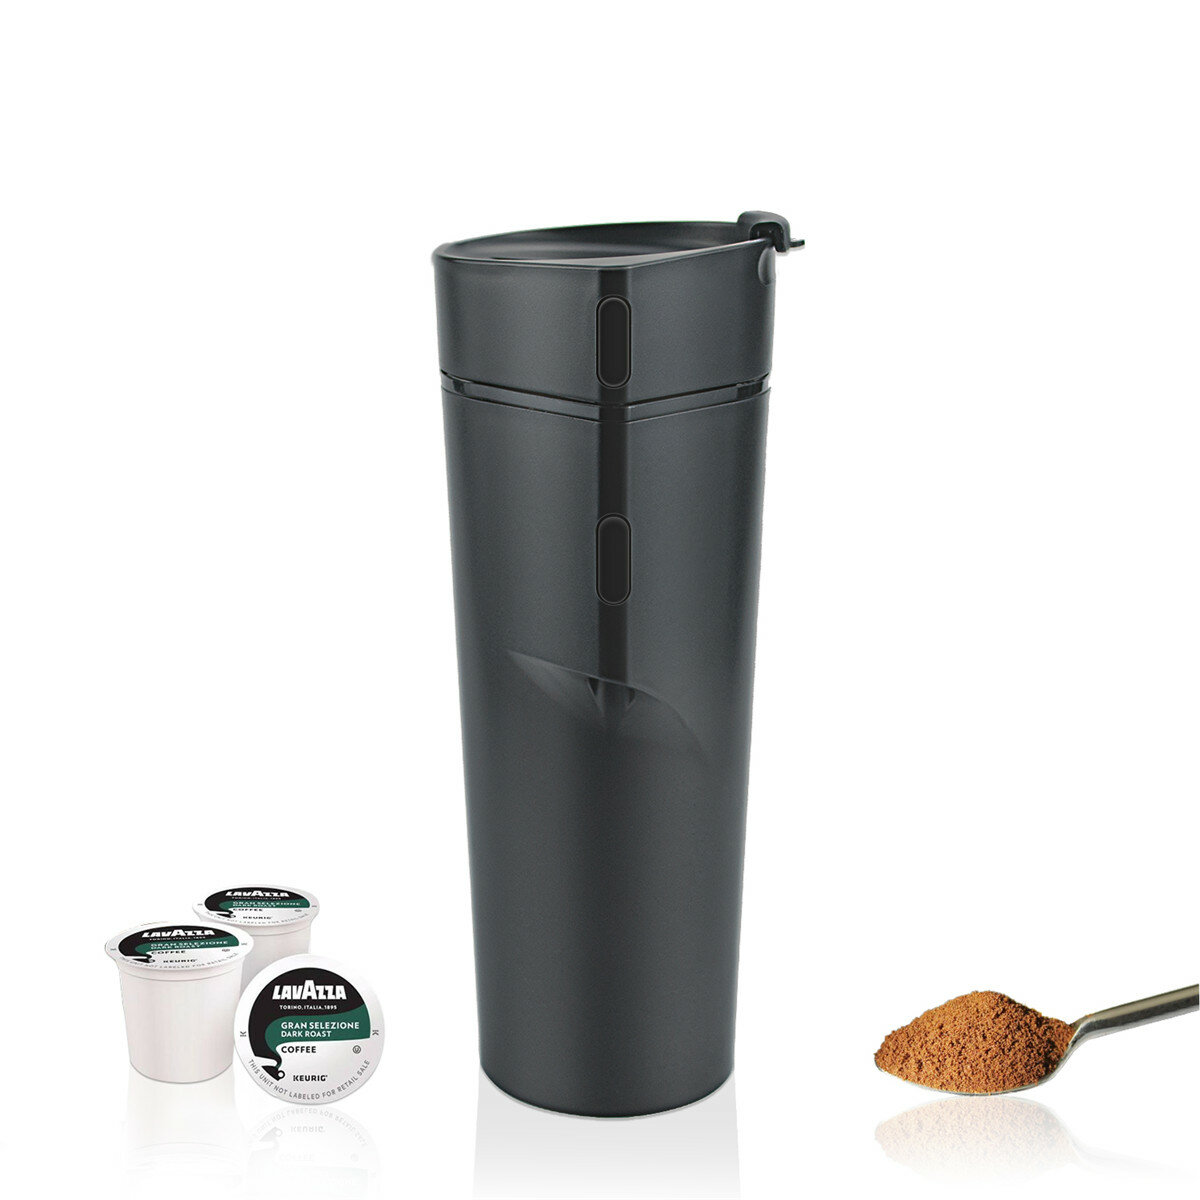 100W 8 OZ Car Coffee Maker Cup Machine Portable Handheld Espresso Capsule Bottle For Camping Travel